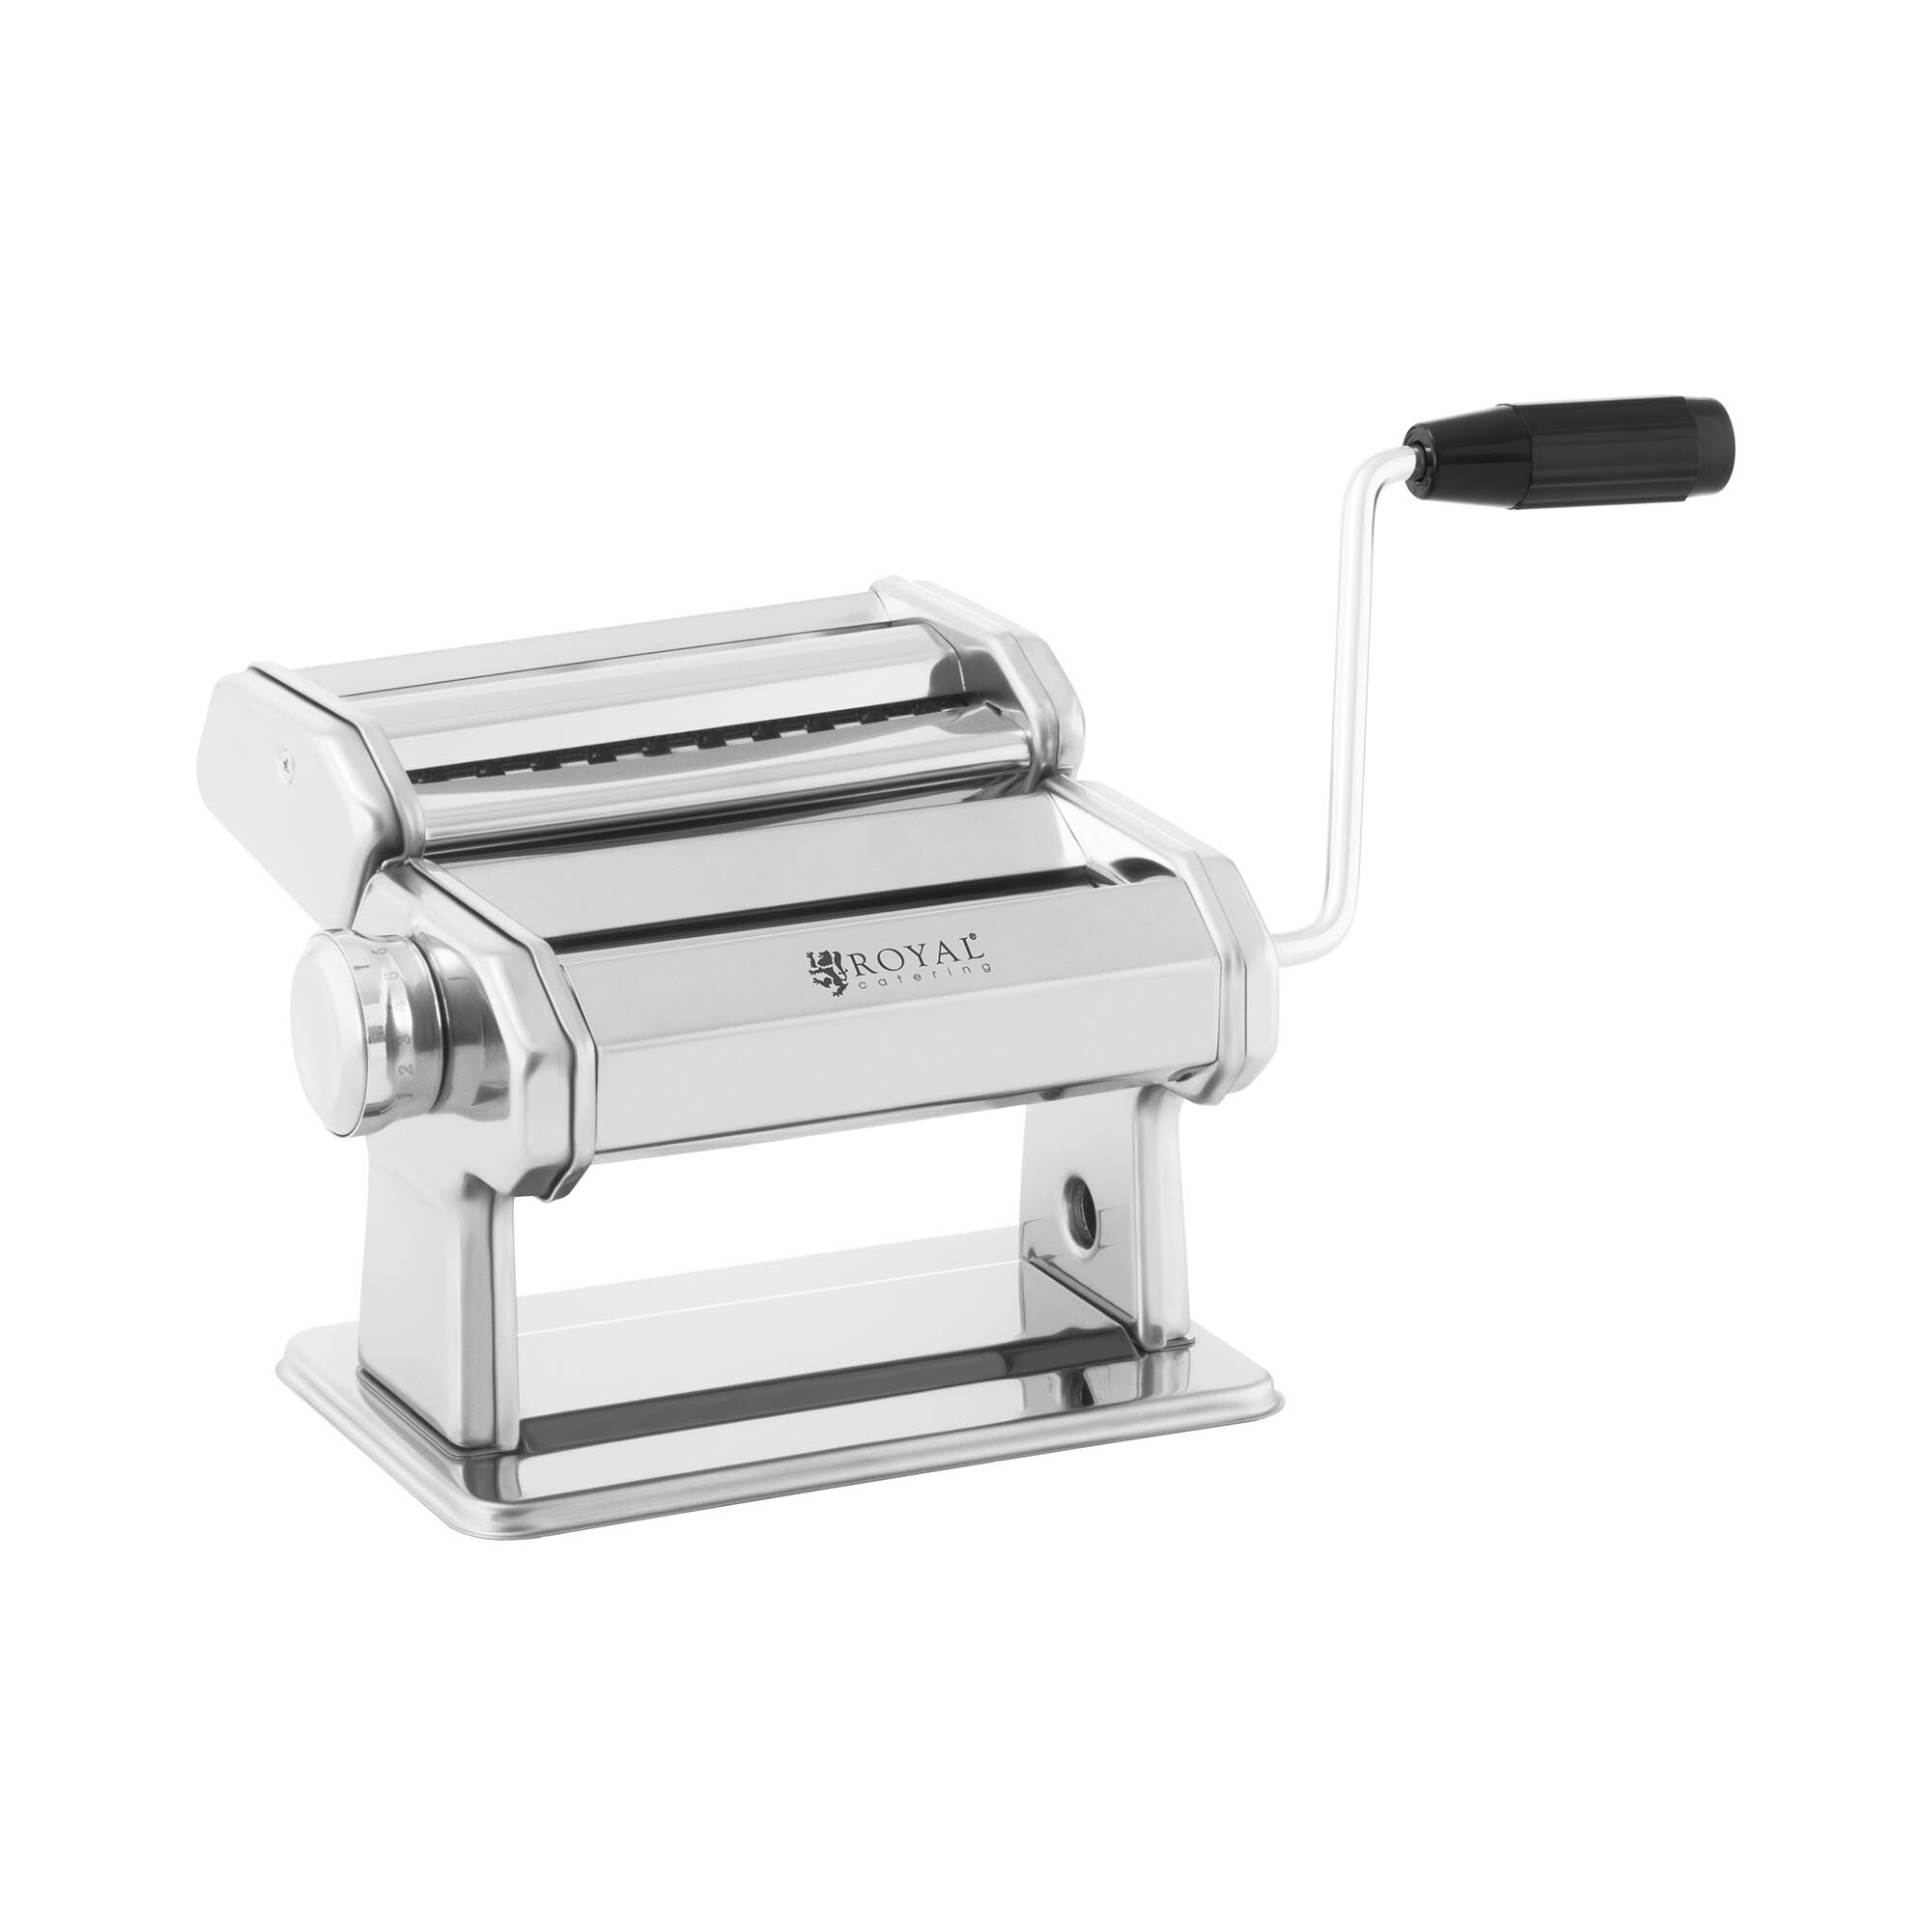 Royal Catering Pasta Machine - 14 cm - 0.5 to 3 mm - manual - removable cutting attachment